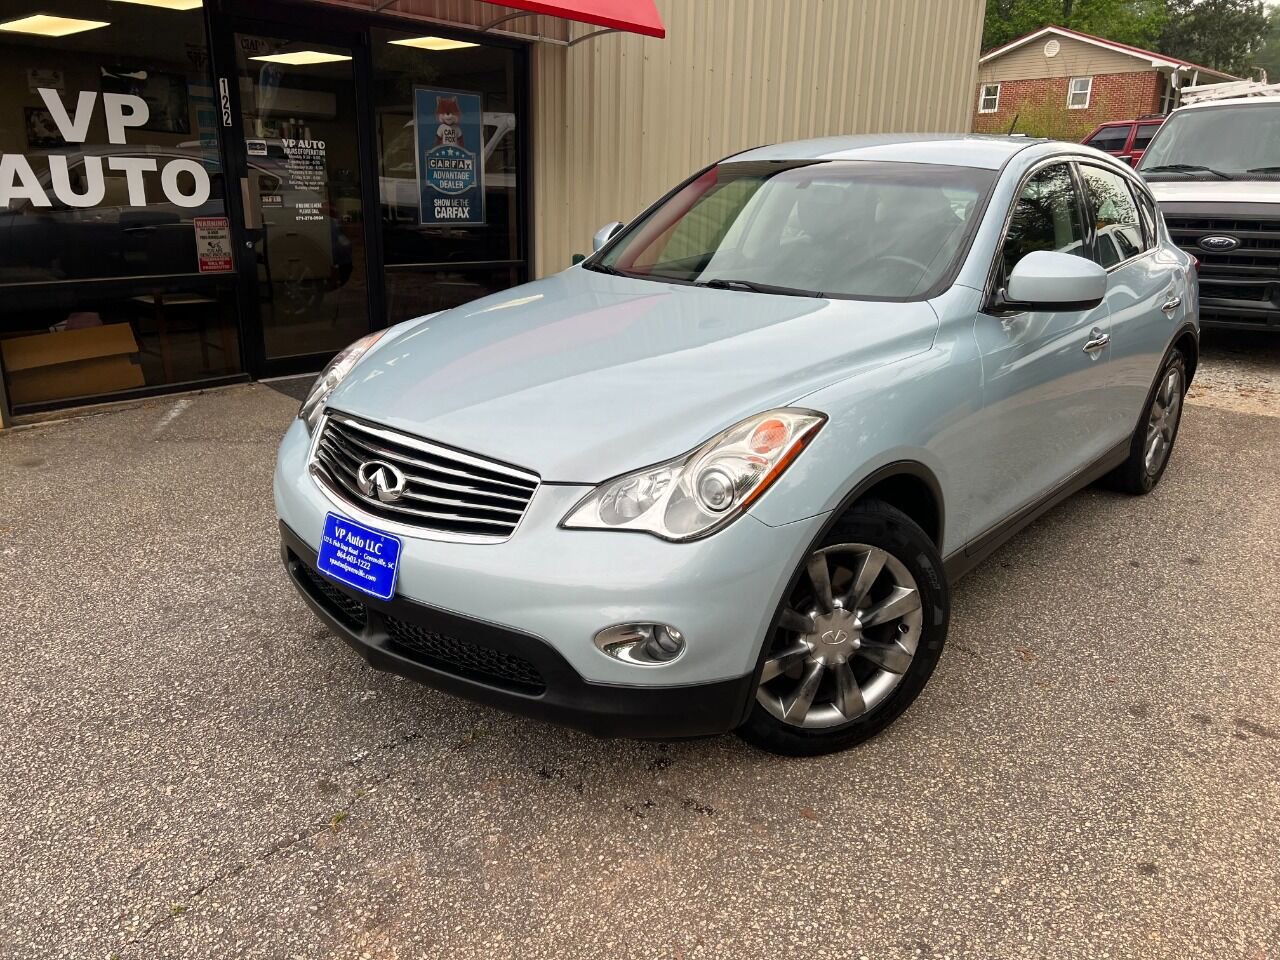 Used 2011 INFINITI EX35 for Sale Near Me in Greenwood, SC - Autotrader